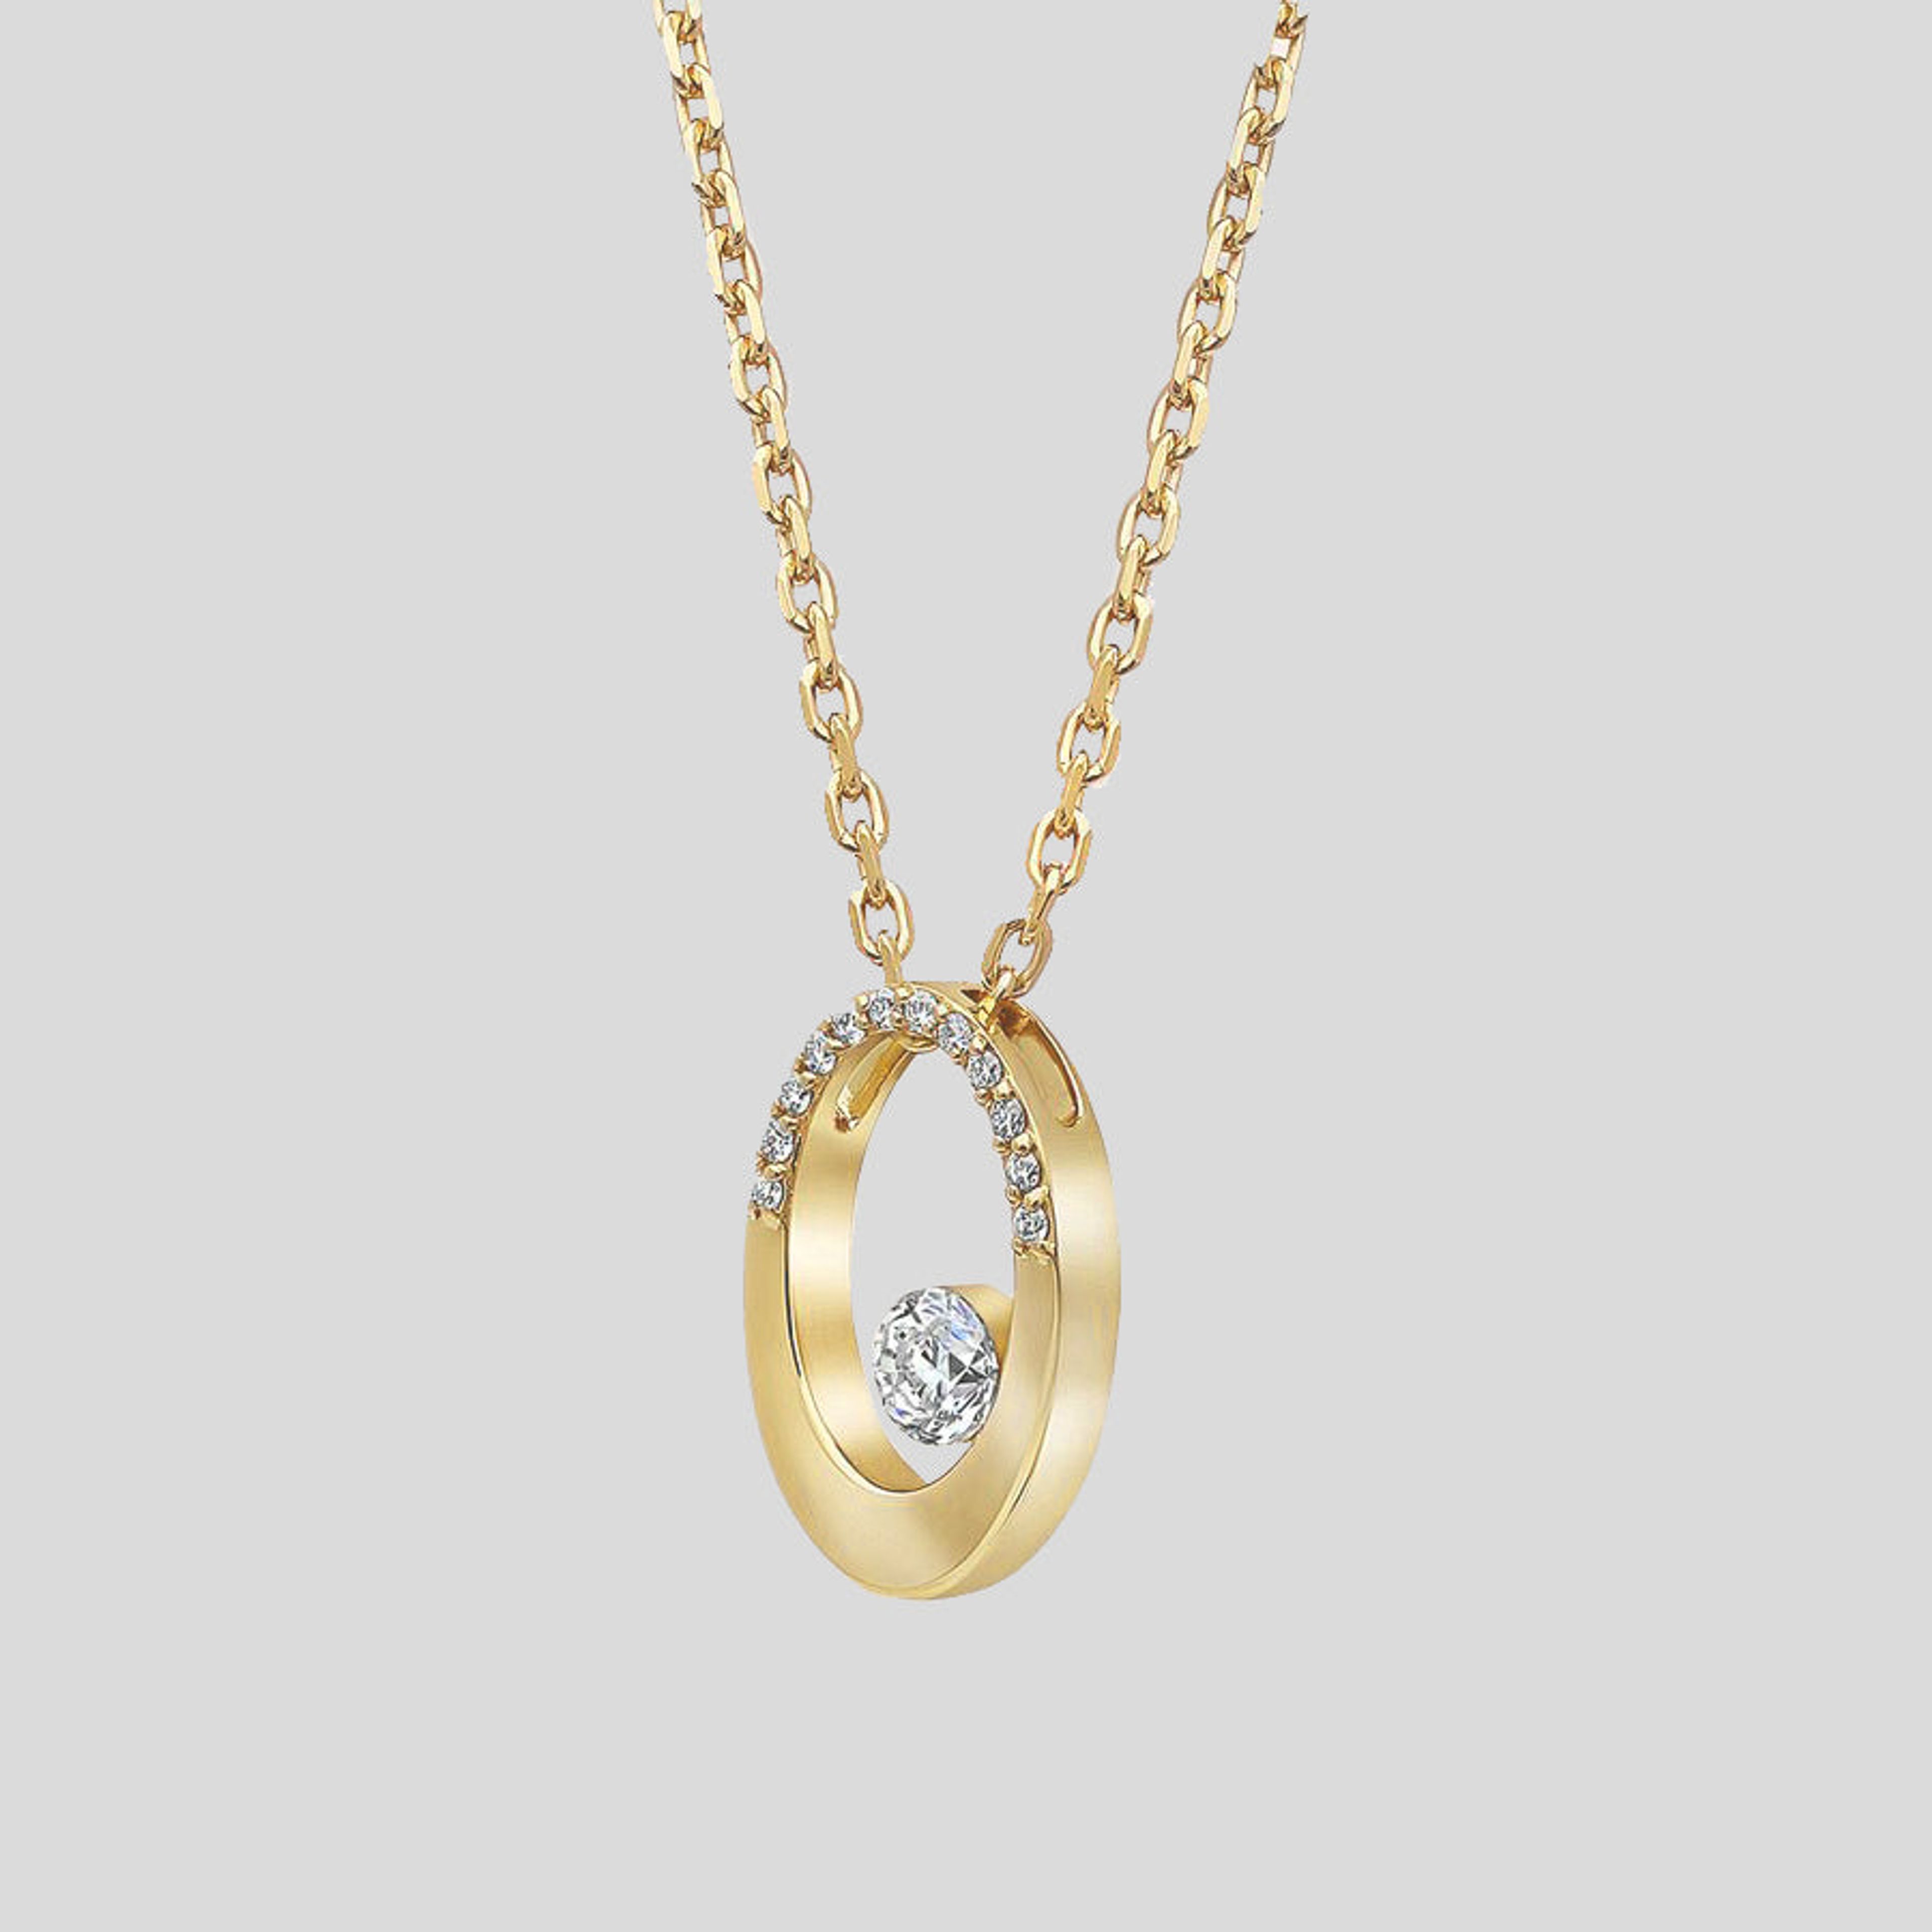 The Oval Floating Diamond Necklace